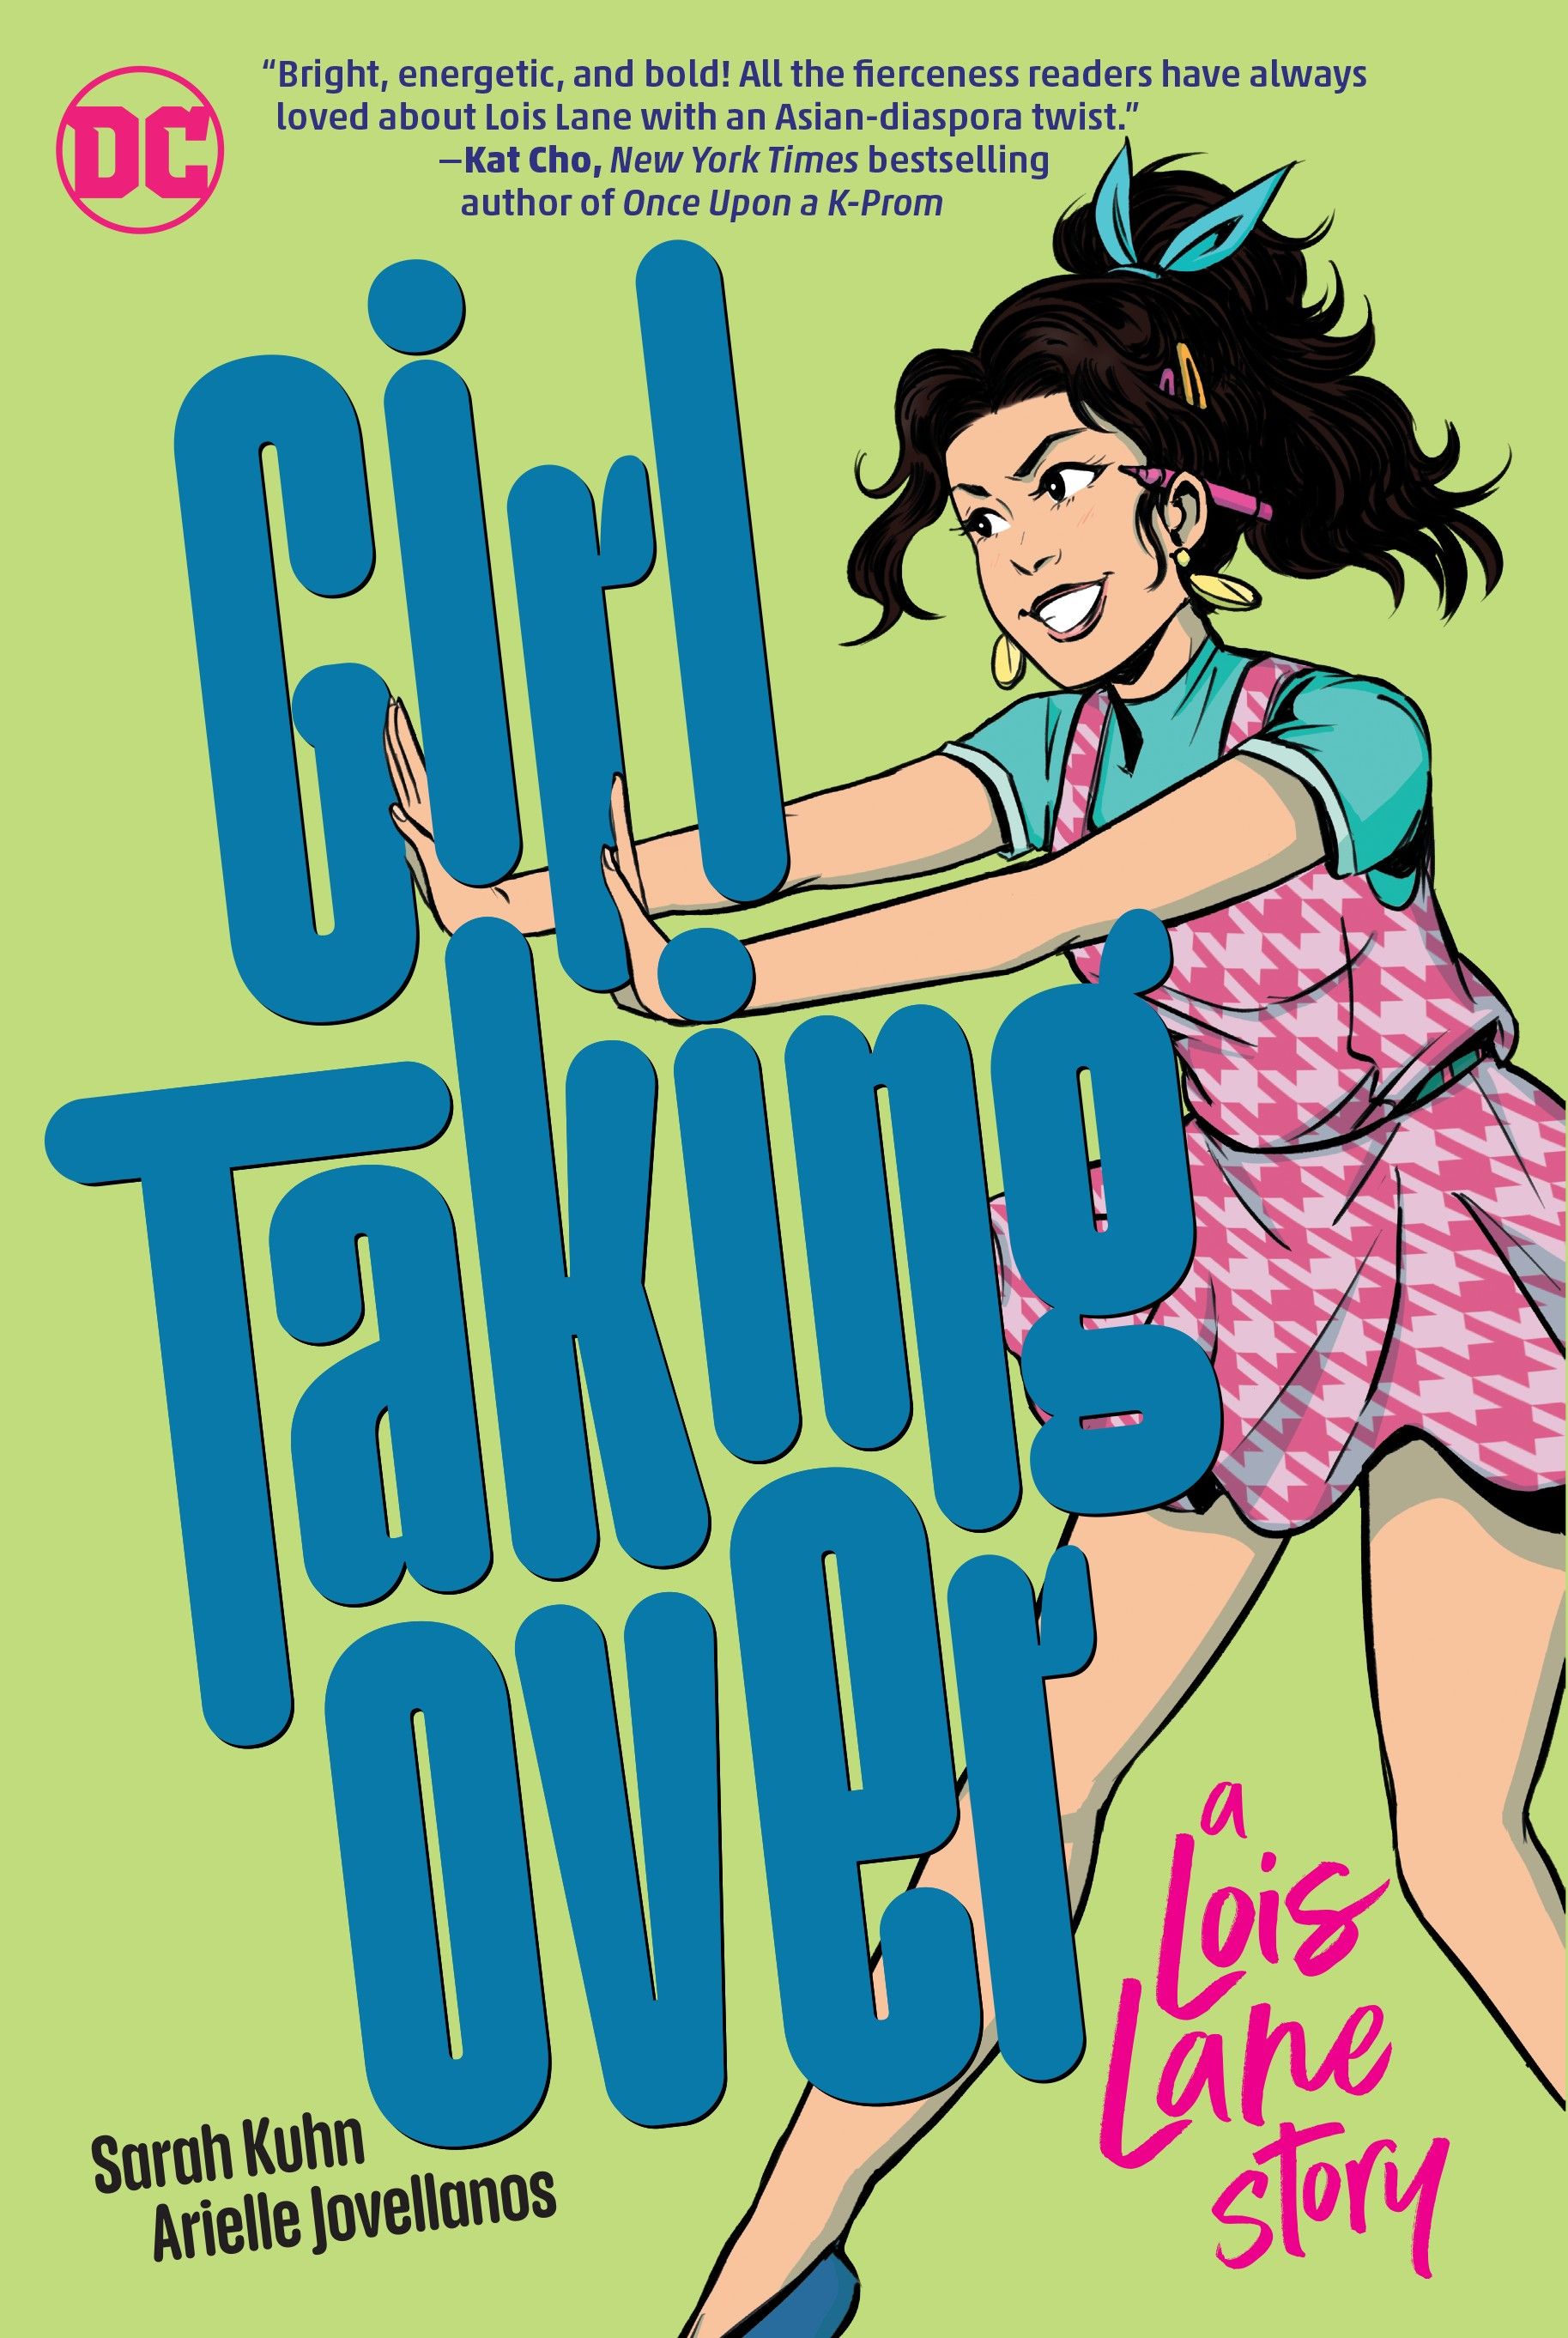 Lois Lane Girl covers up with a blurb